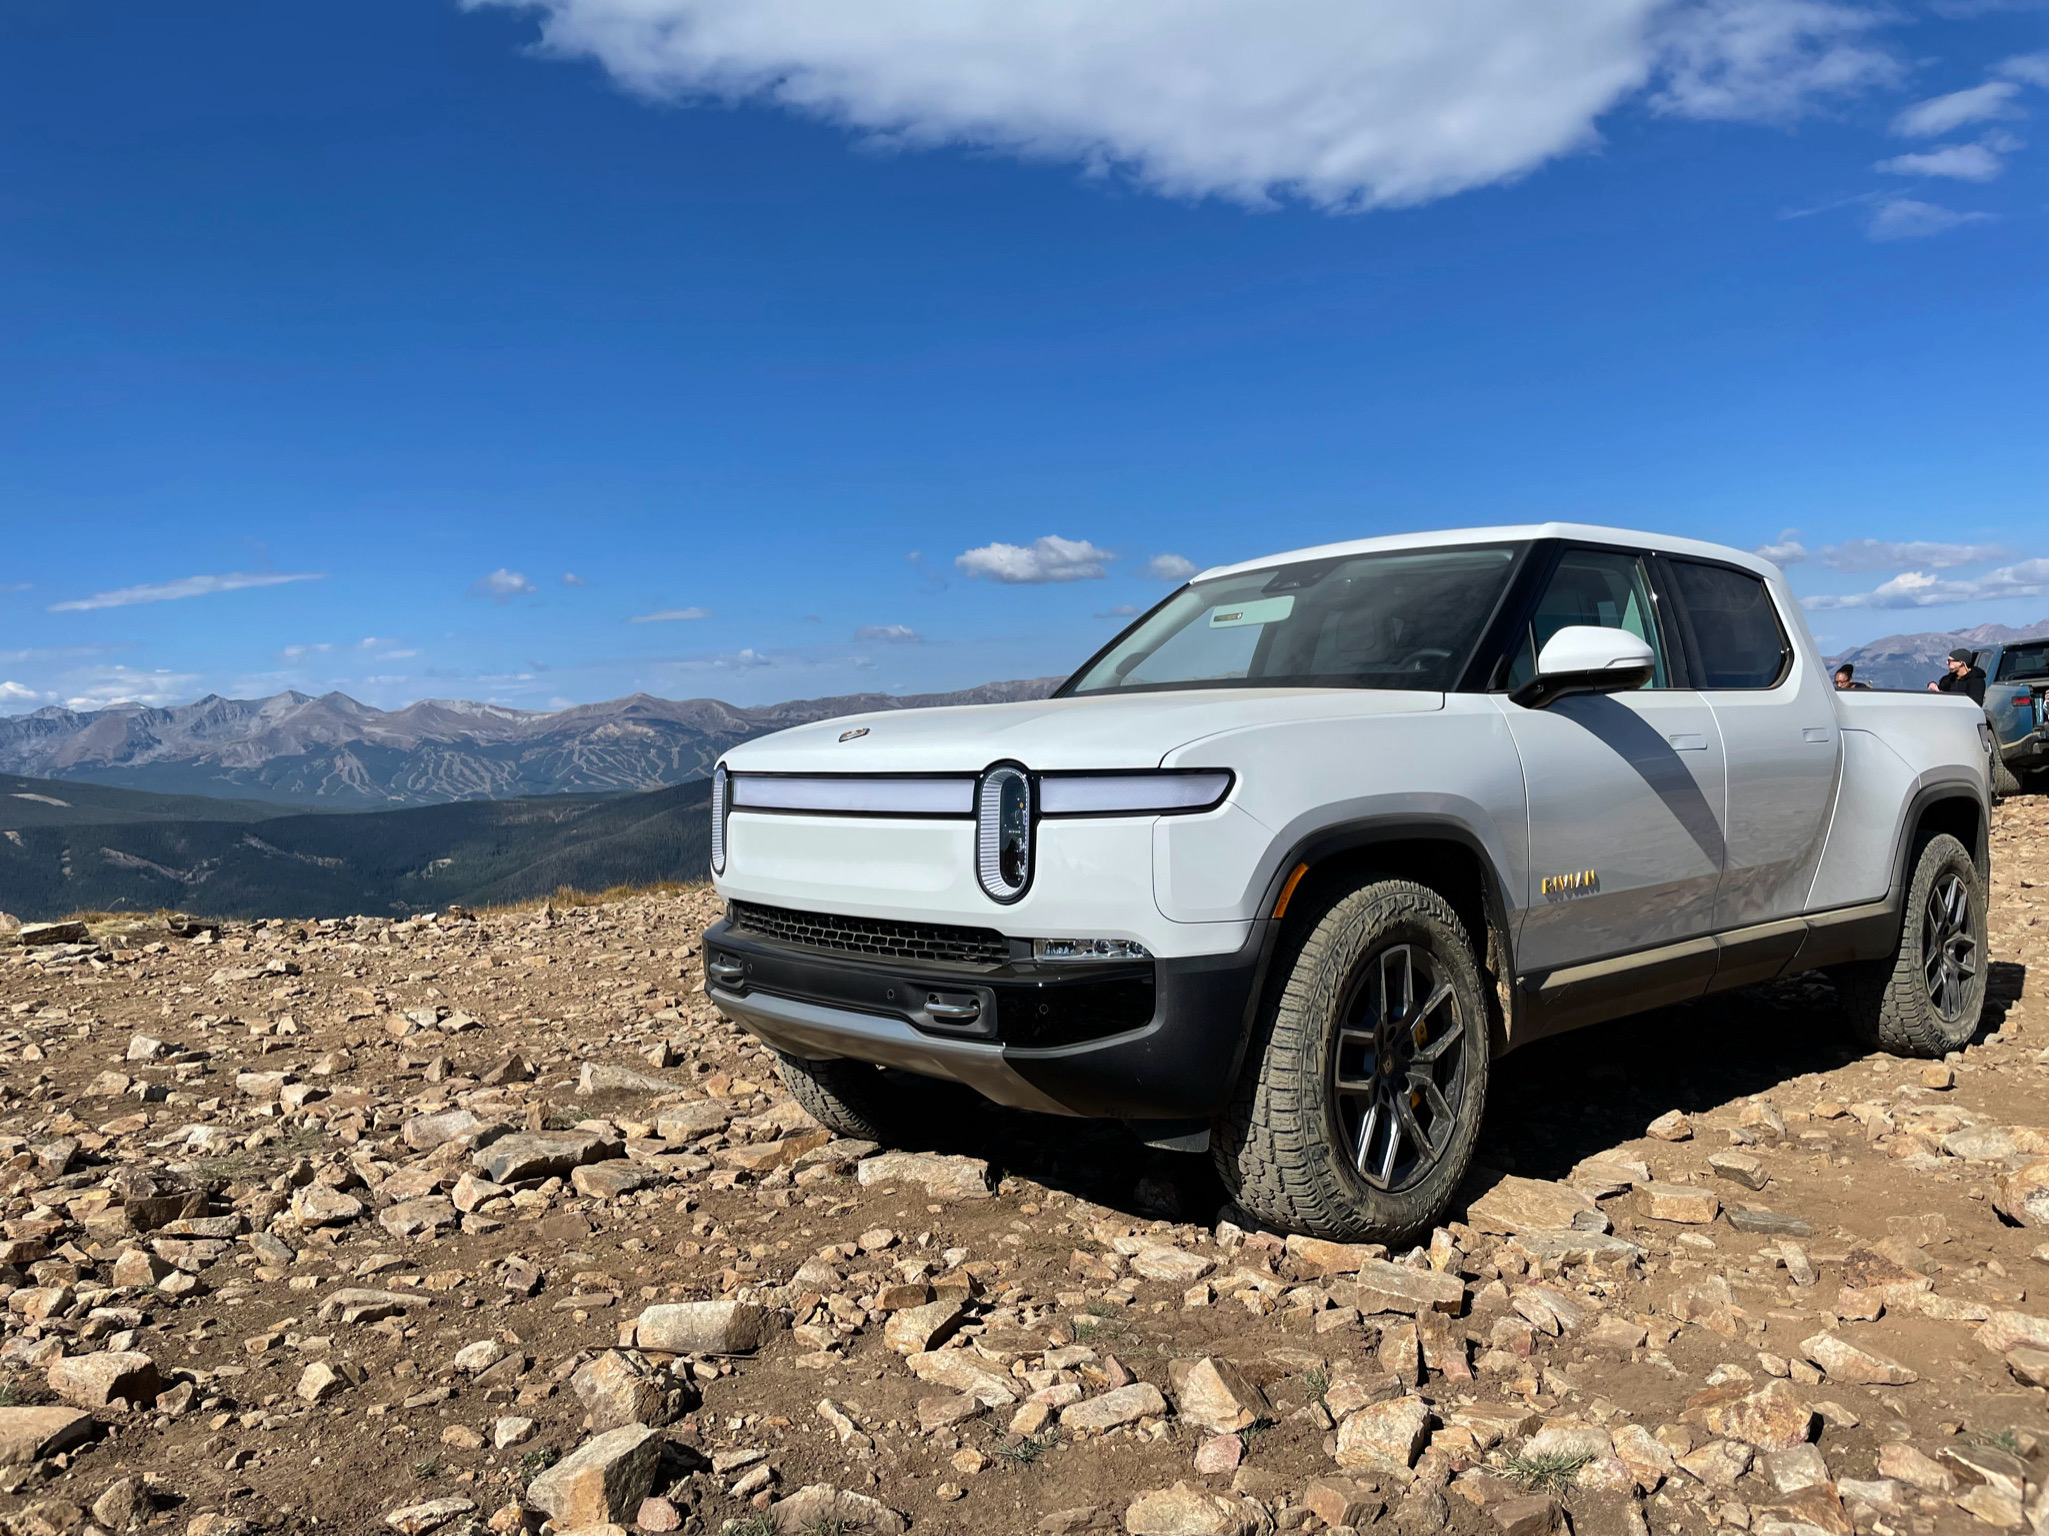 Can Rivian Reach Profitability at 25,000 Vehicle Deliveries per Year?